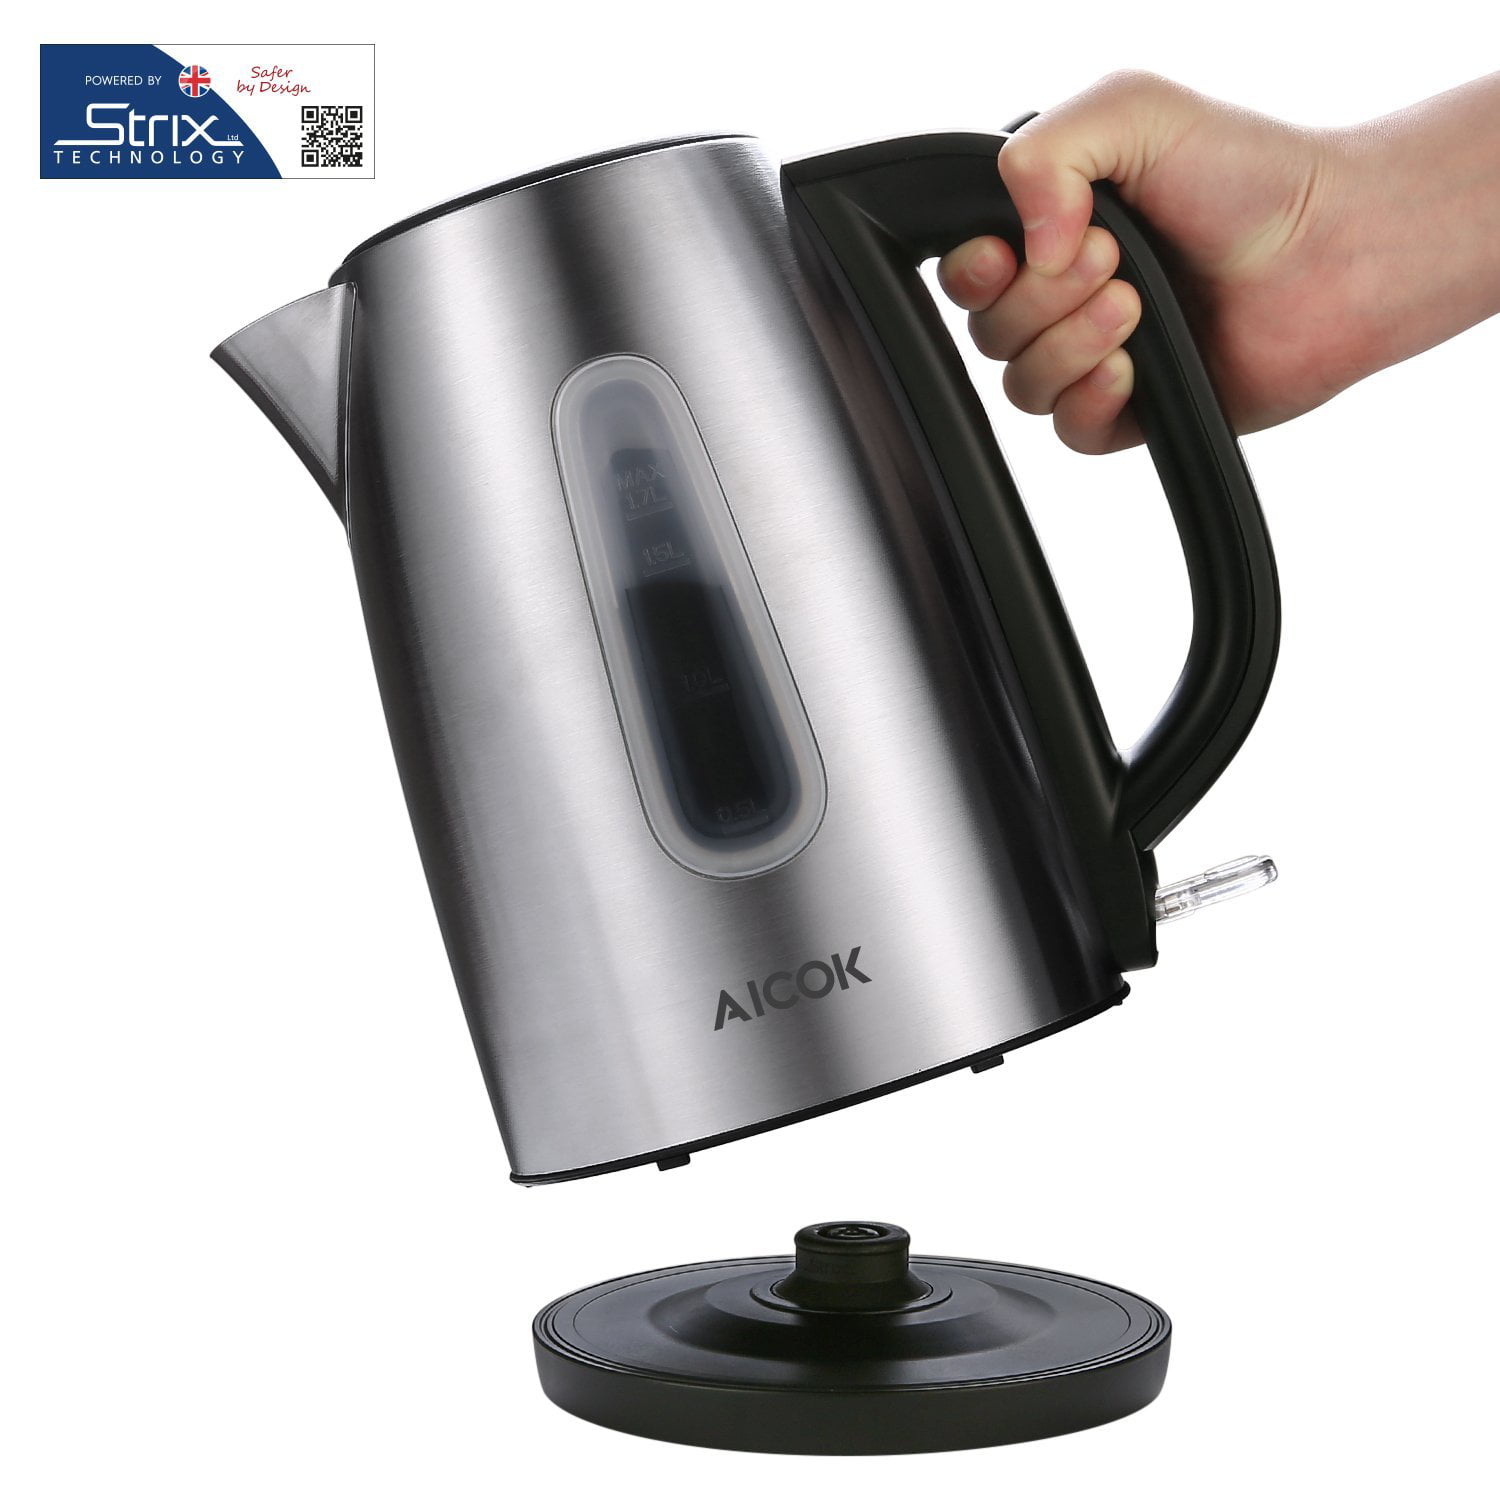 Stainless Steel Electric Kettle - 1.7 Liter - 40989